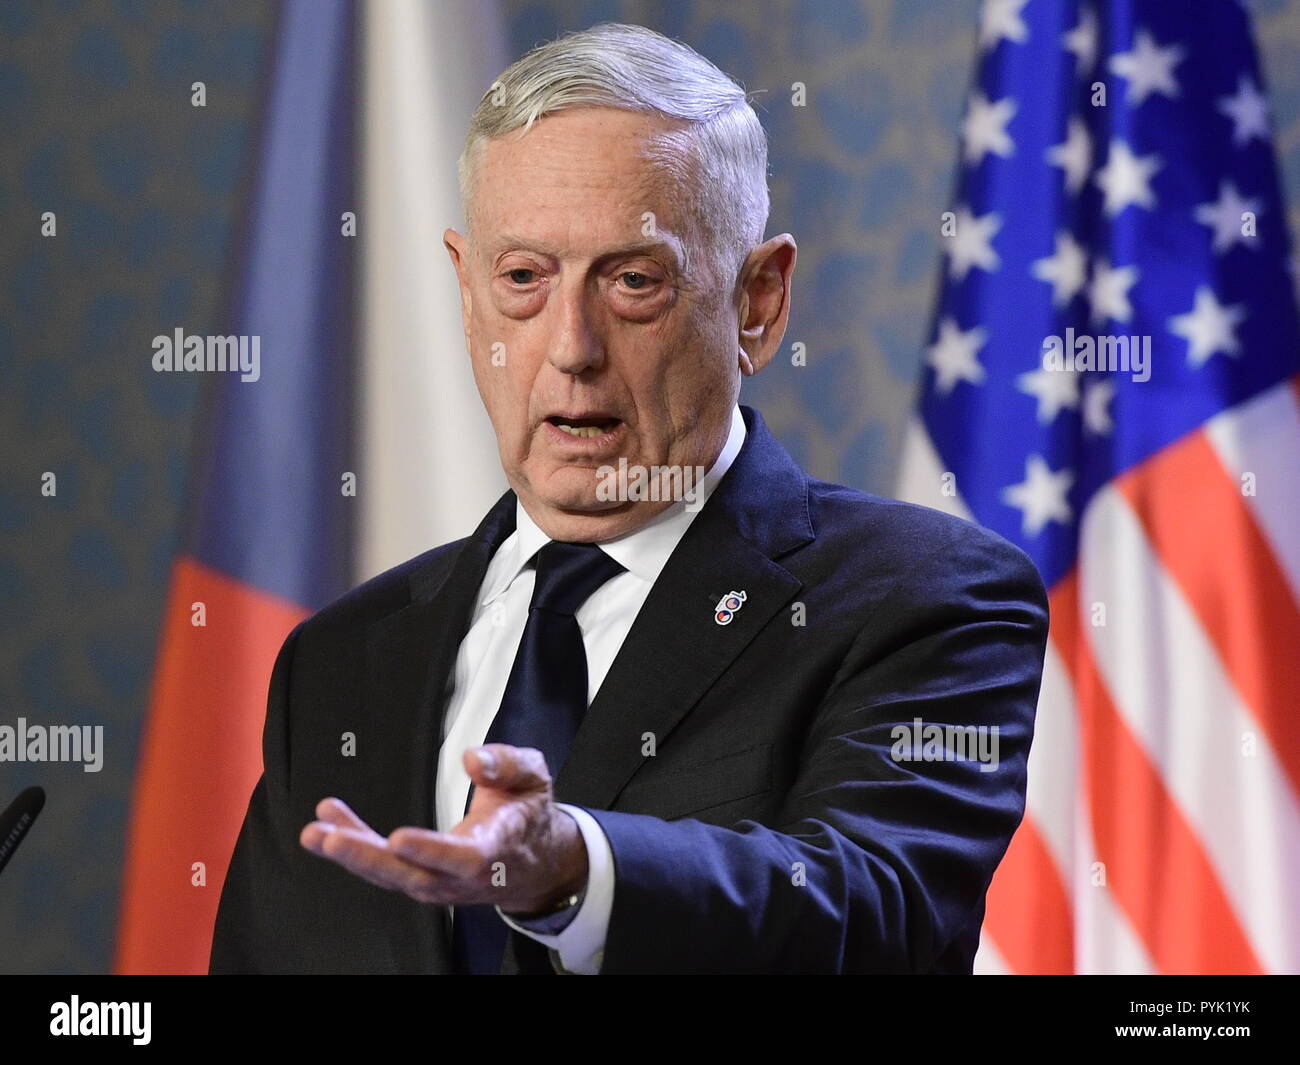 Prague, Czech Republic. 28th Oct, 2018. U.S. Defense Secretary Jim Mattis speaks during a press conference Czech Prime Minister Andrej Babis in Prague, Czech Republic, Sunday, October 28, 2018. Mattis arrives in Prague to mark the 100th anniversary of the 1918 creation of the Czechoslovak state. Credit: Roman Vondrous/CTK Photo/Alamy Live News Stock Photo